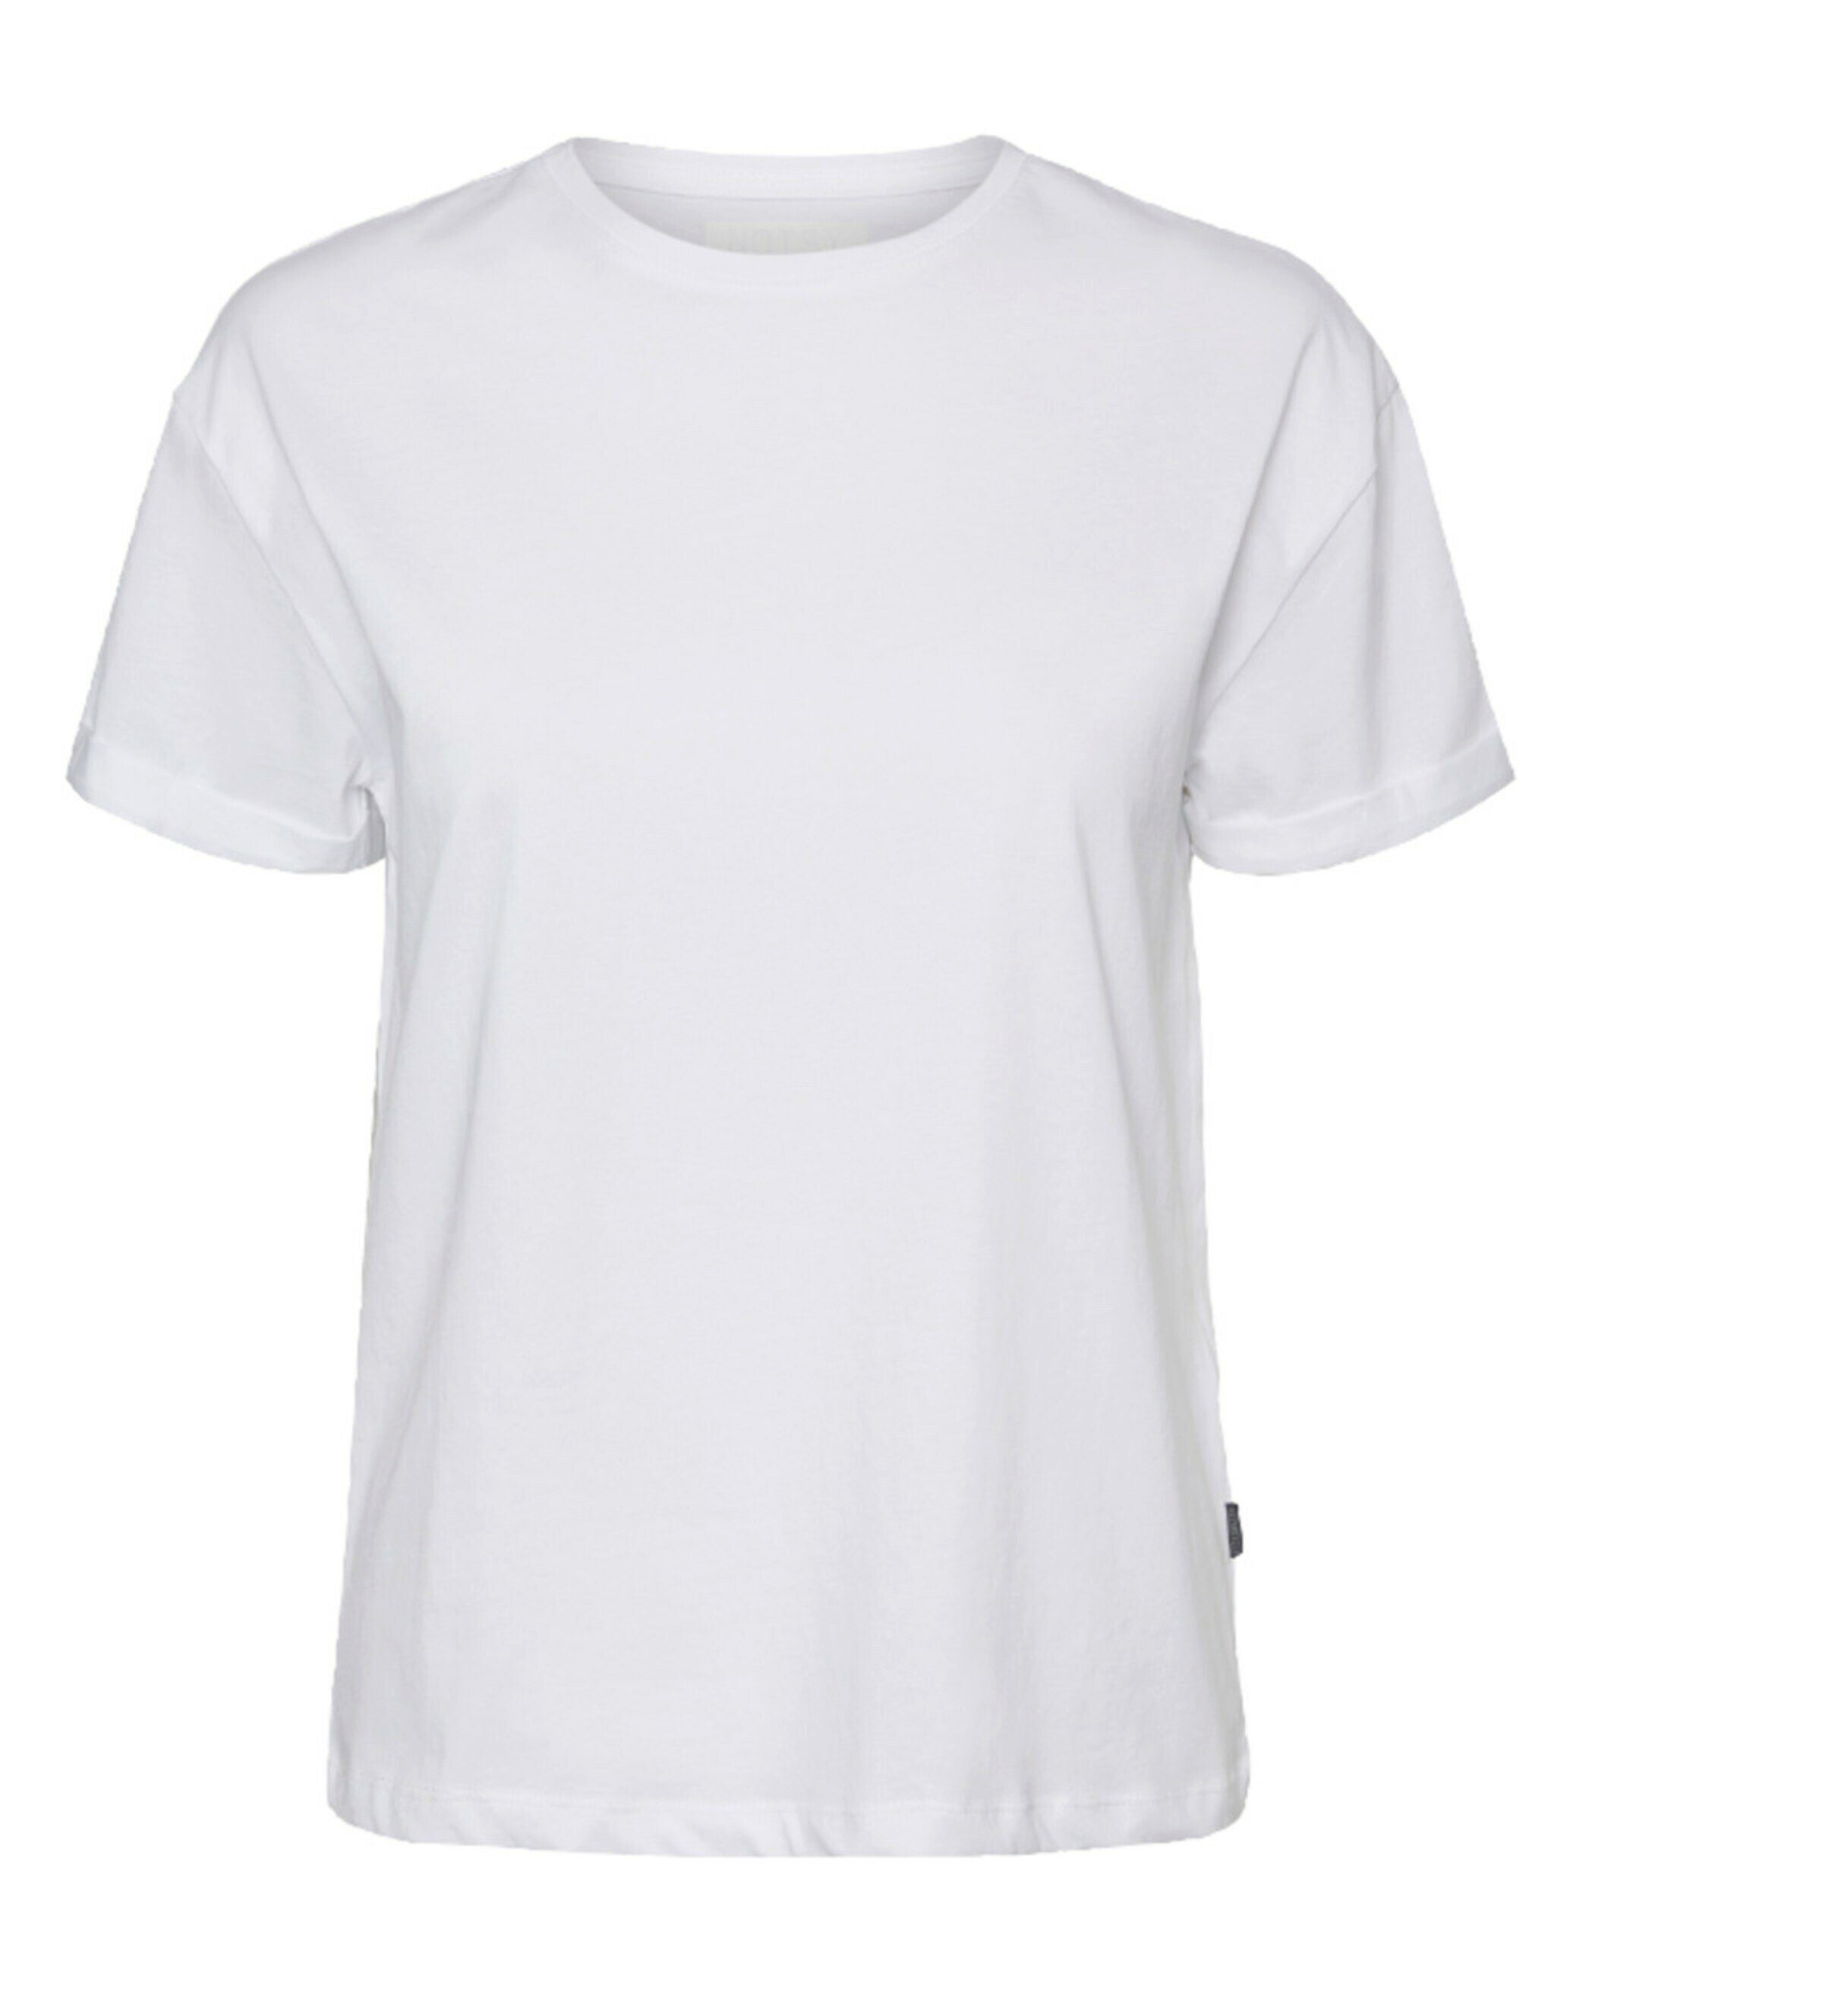 Brandy White Details Detail, may Bright Noisy Weiteres (1-tlg) Plain/ohne T-Shirt